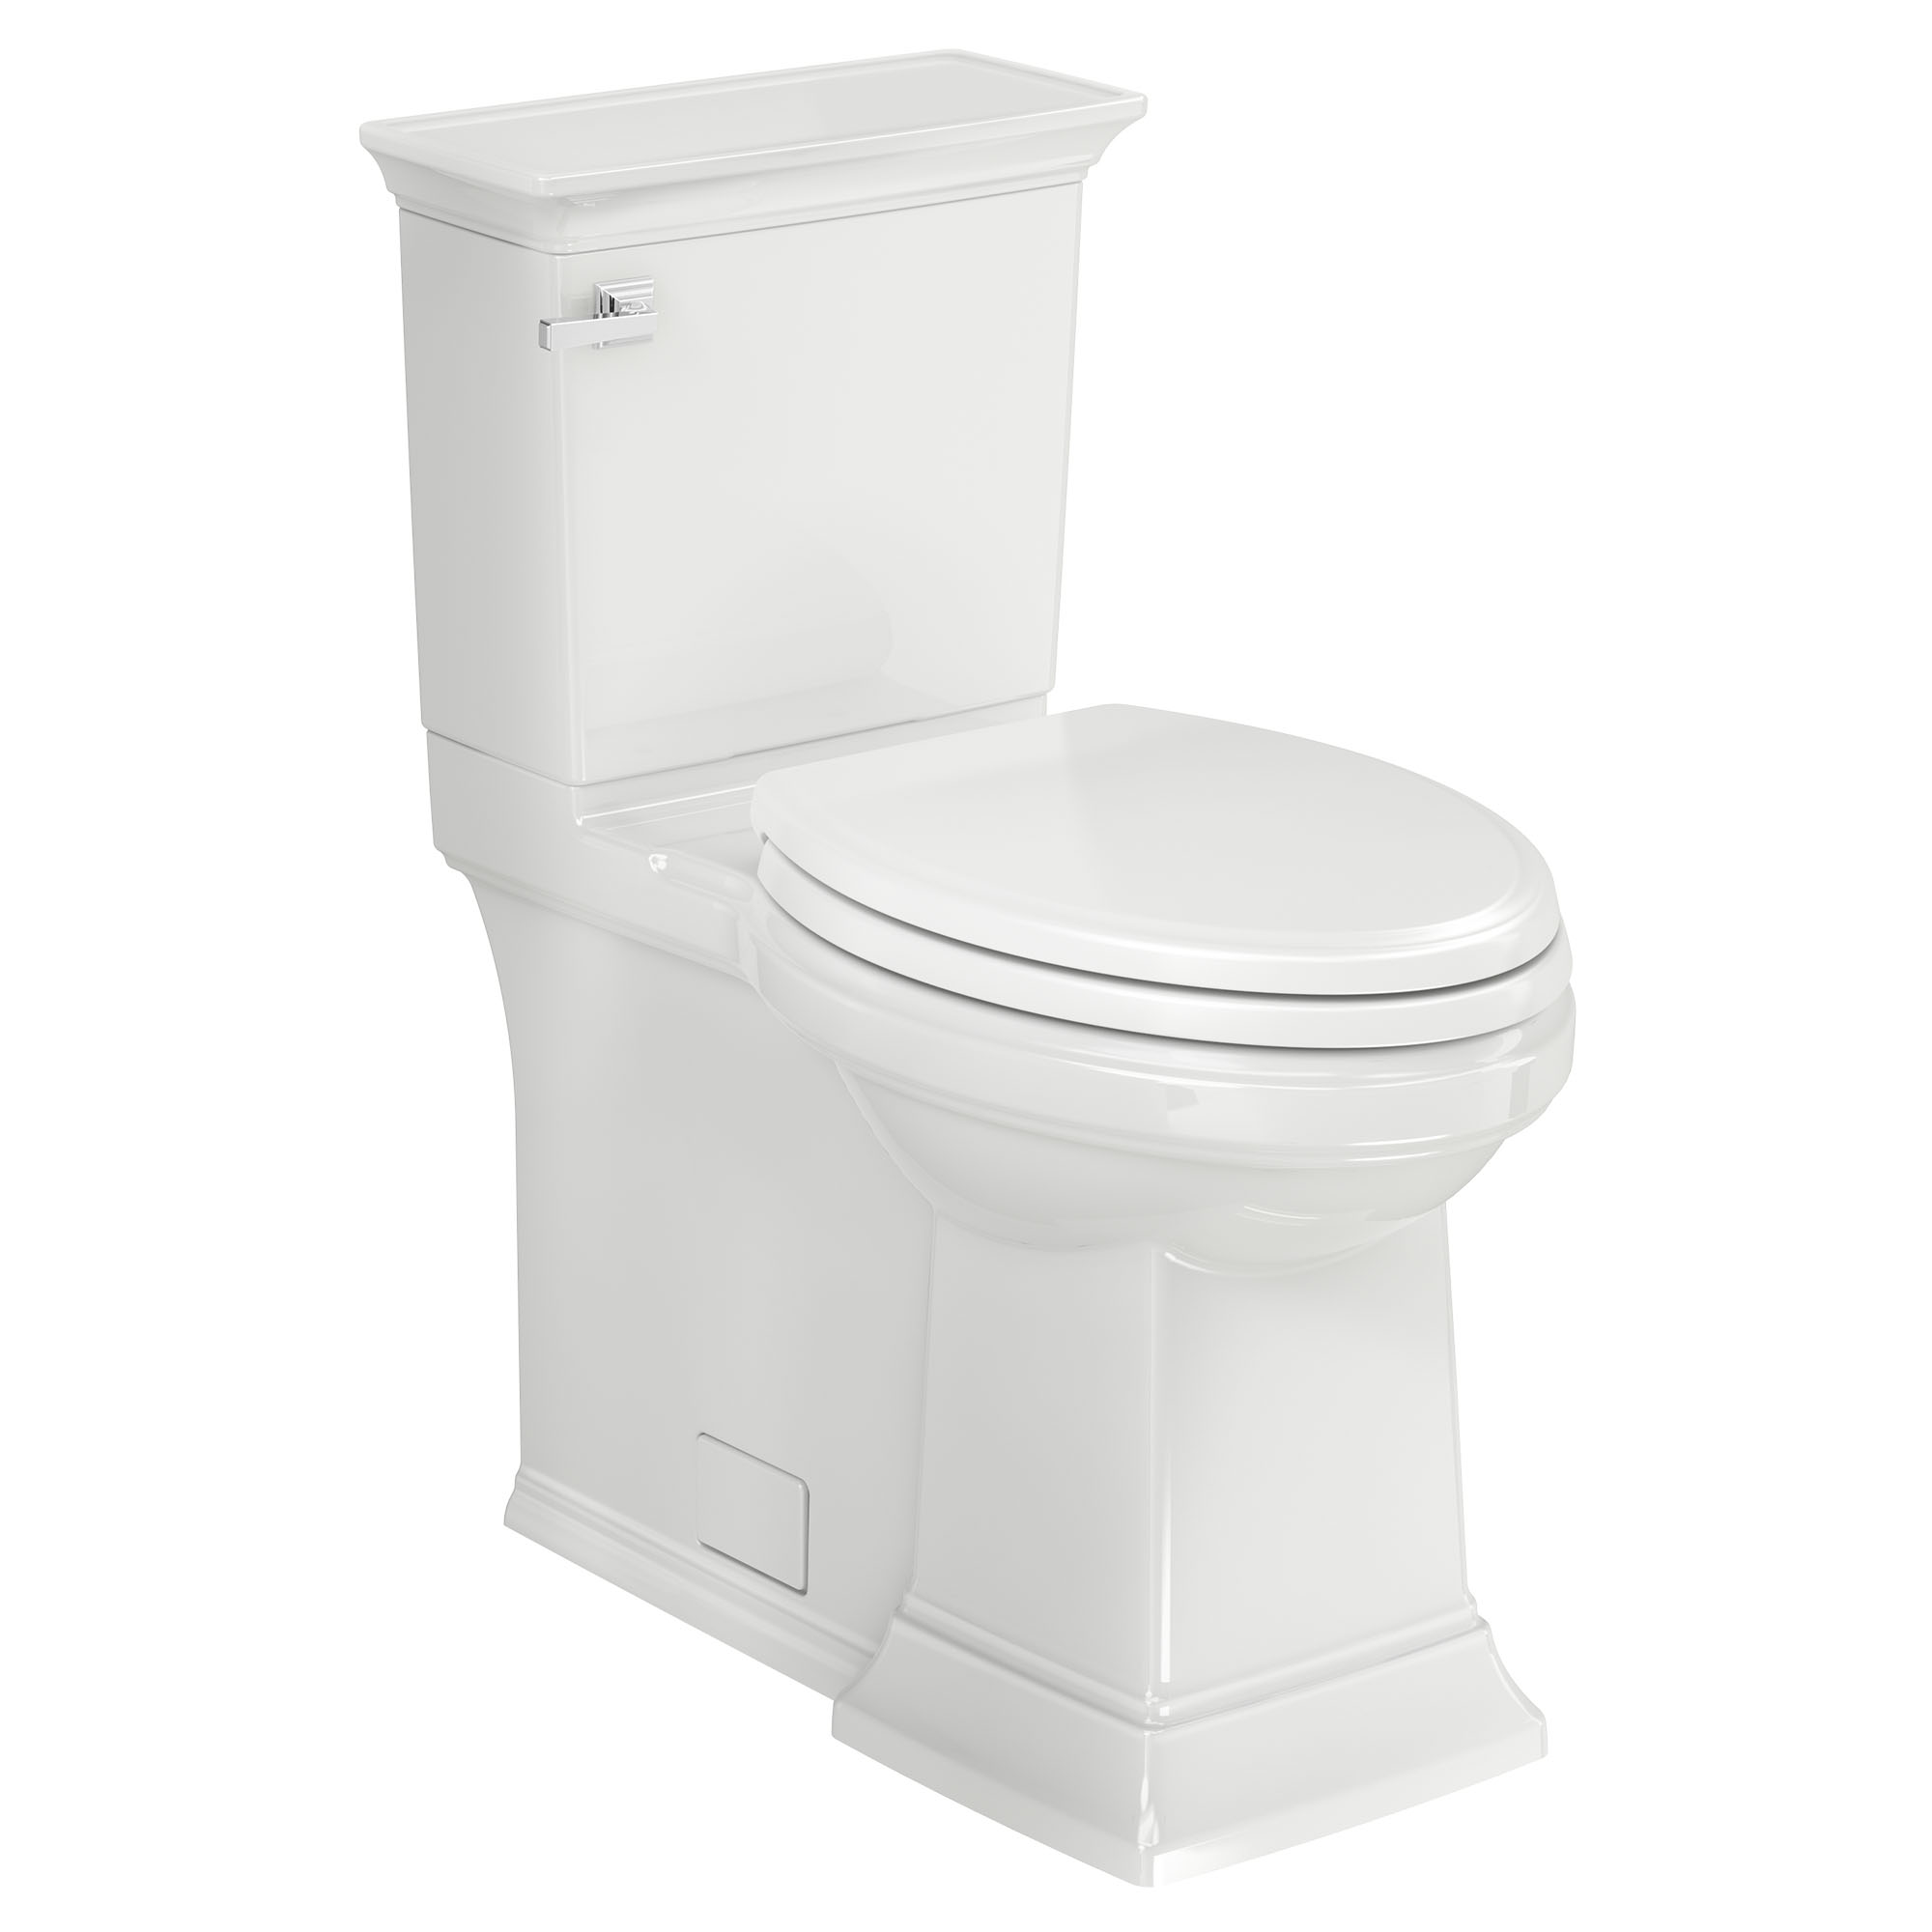 Town Square® S Skirted Two-Piece 1.28 gpf/4.8 Lpf Chair Height Elongated Toilet With Seat